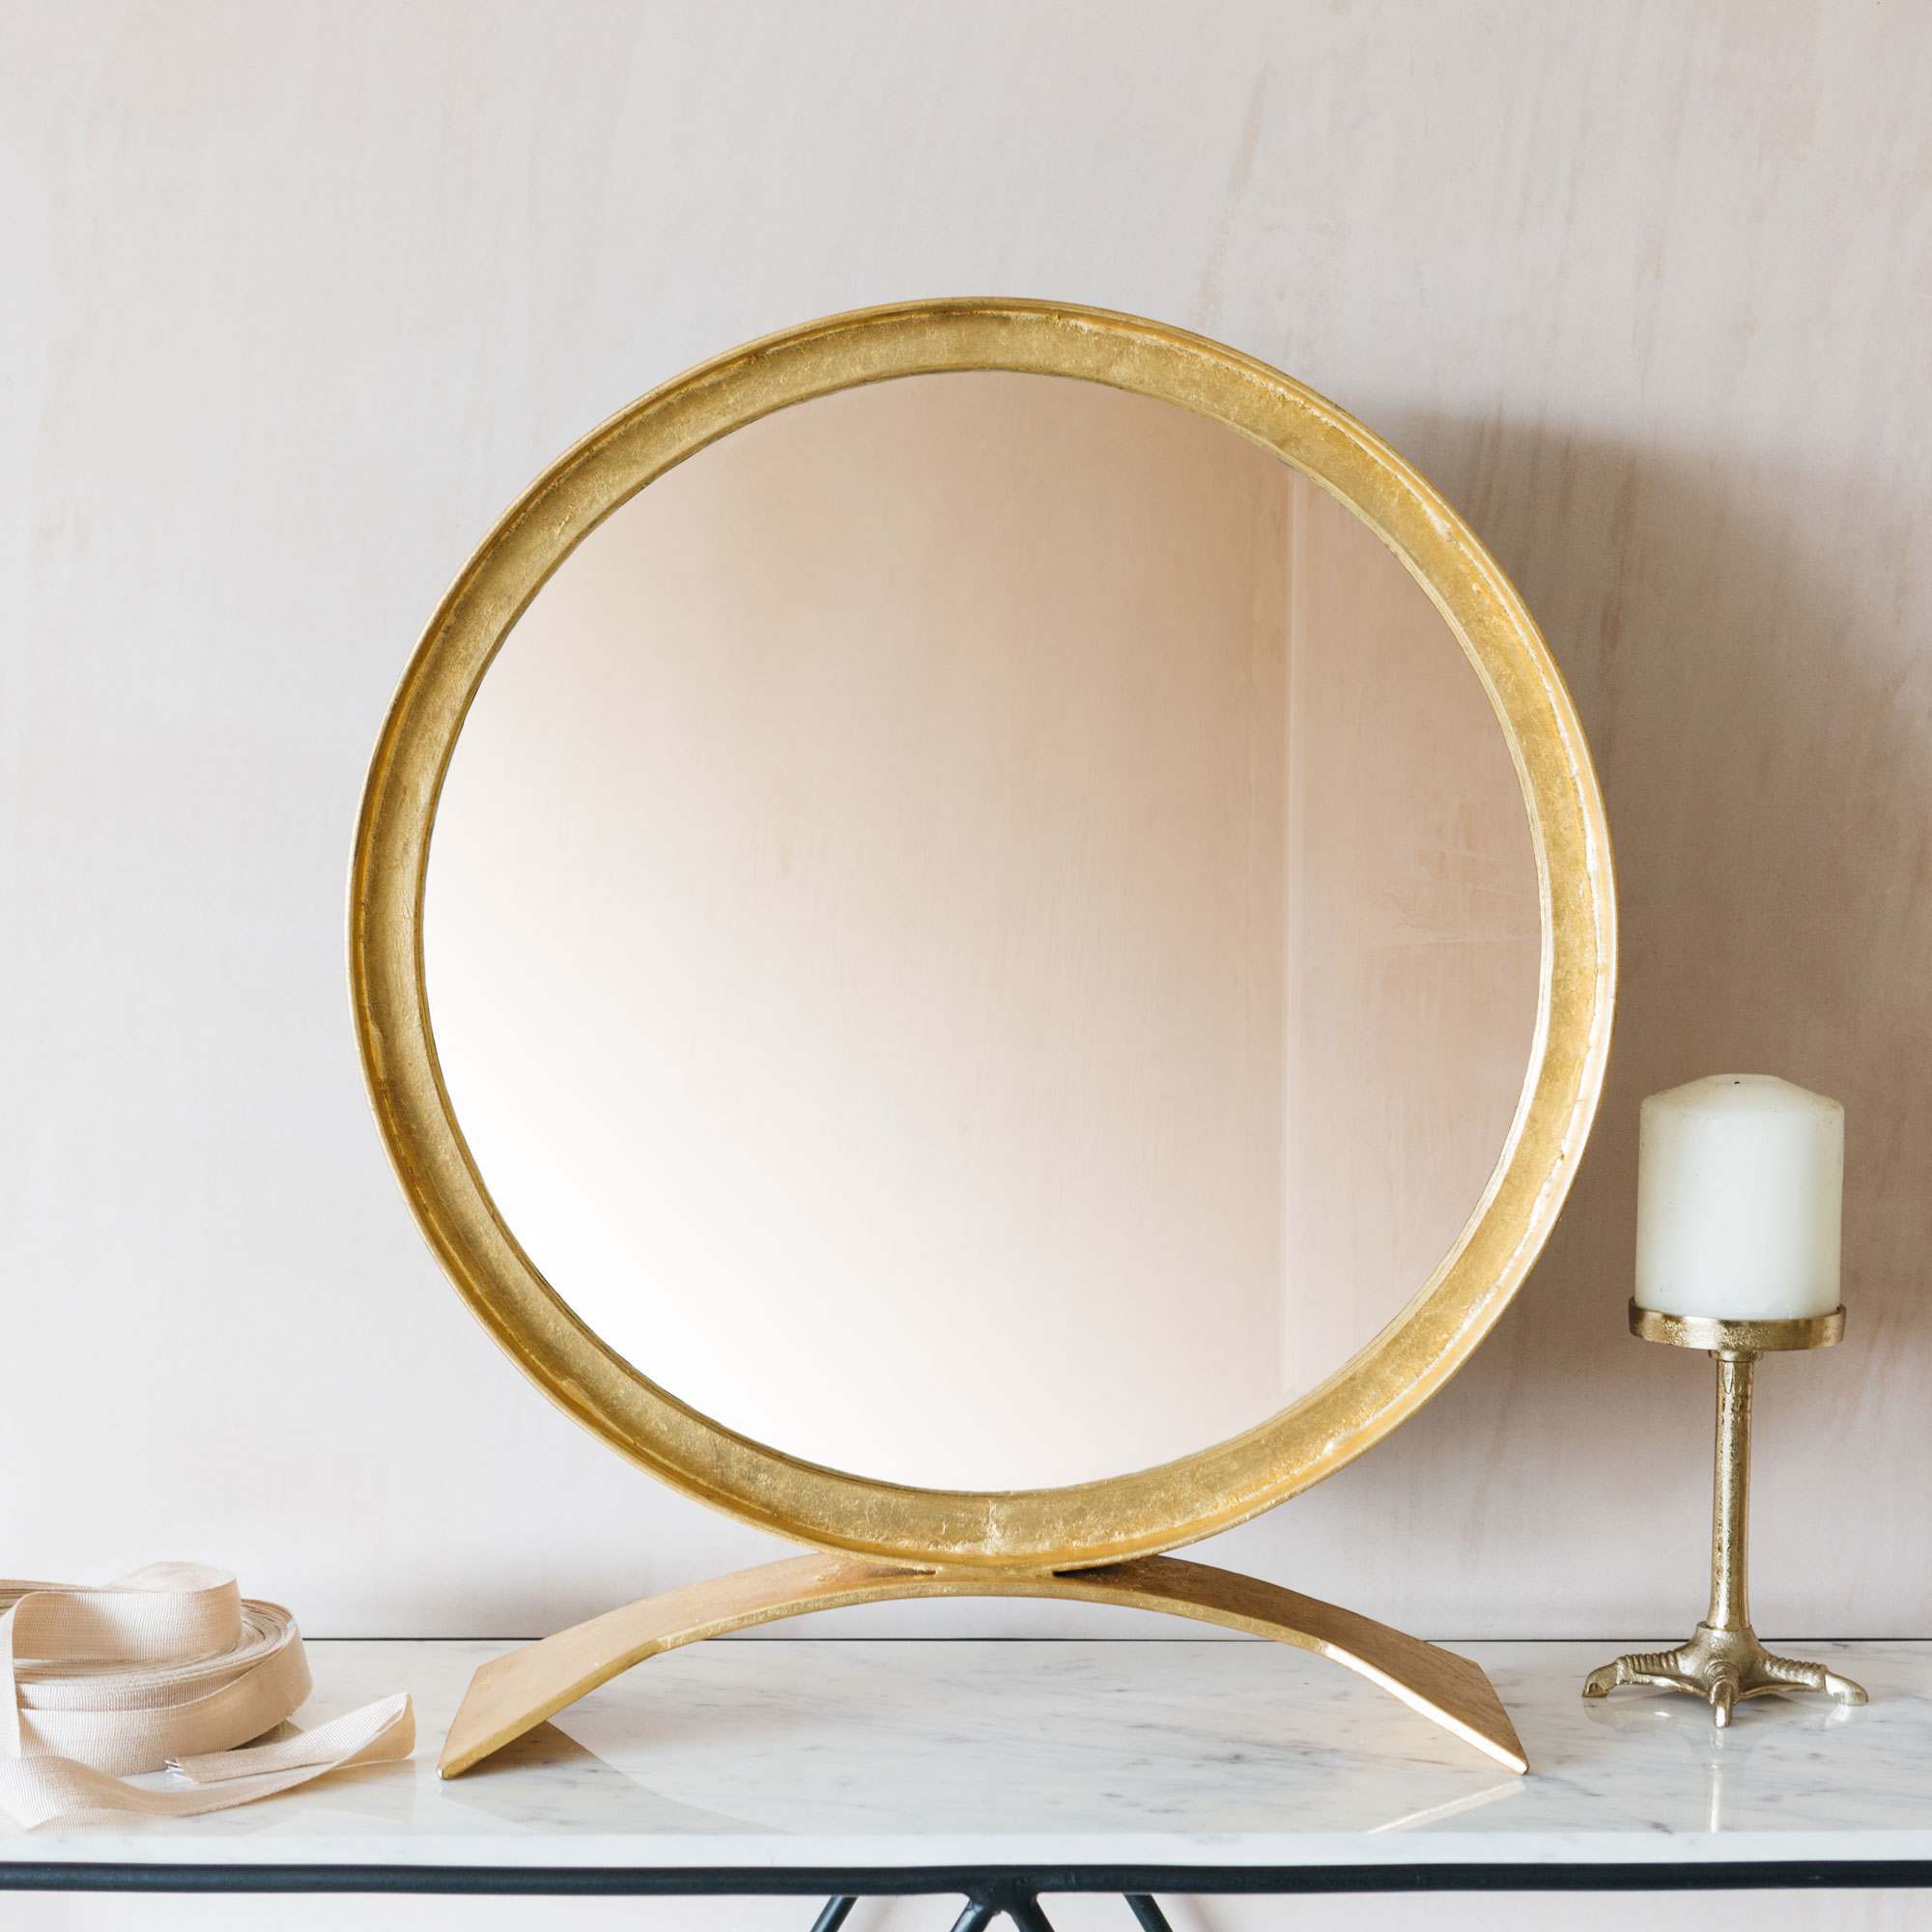 Read more about Graham and green zander small gold table mirror